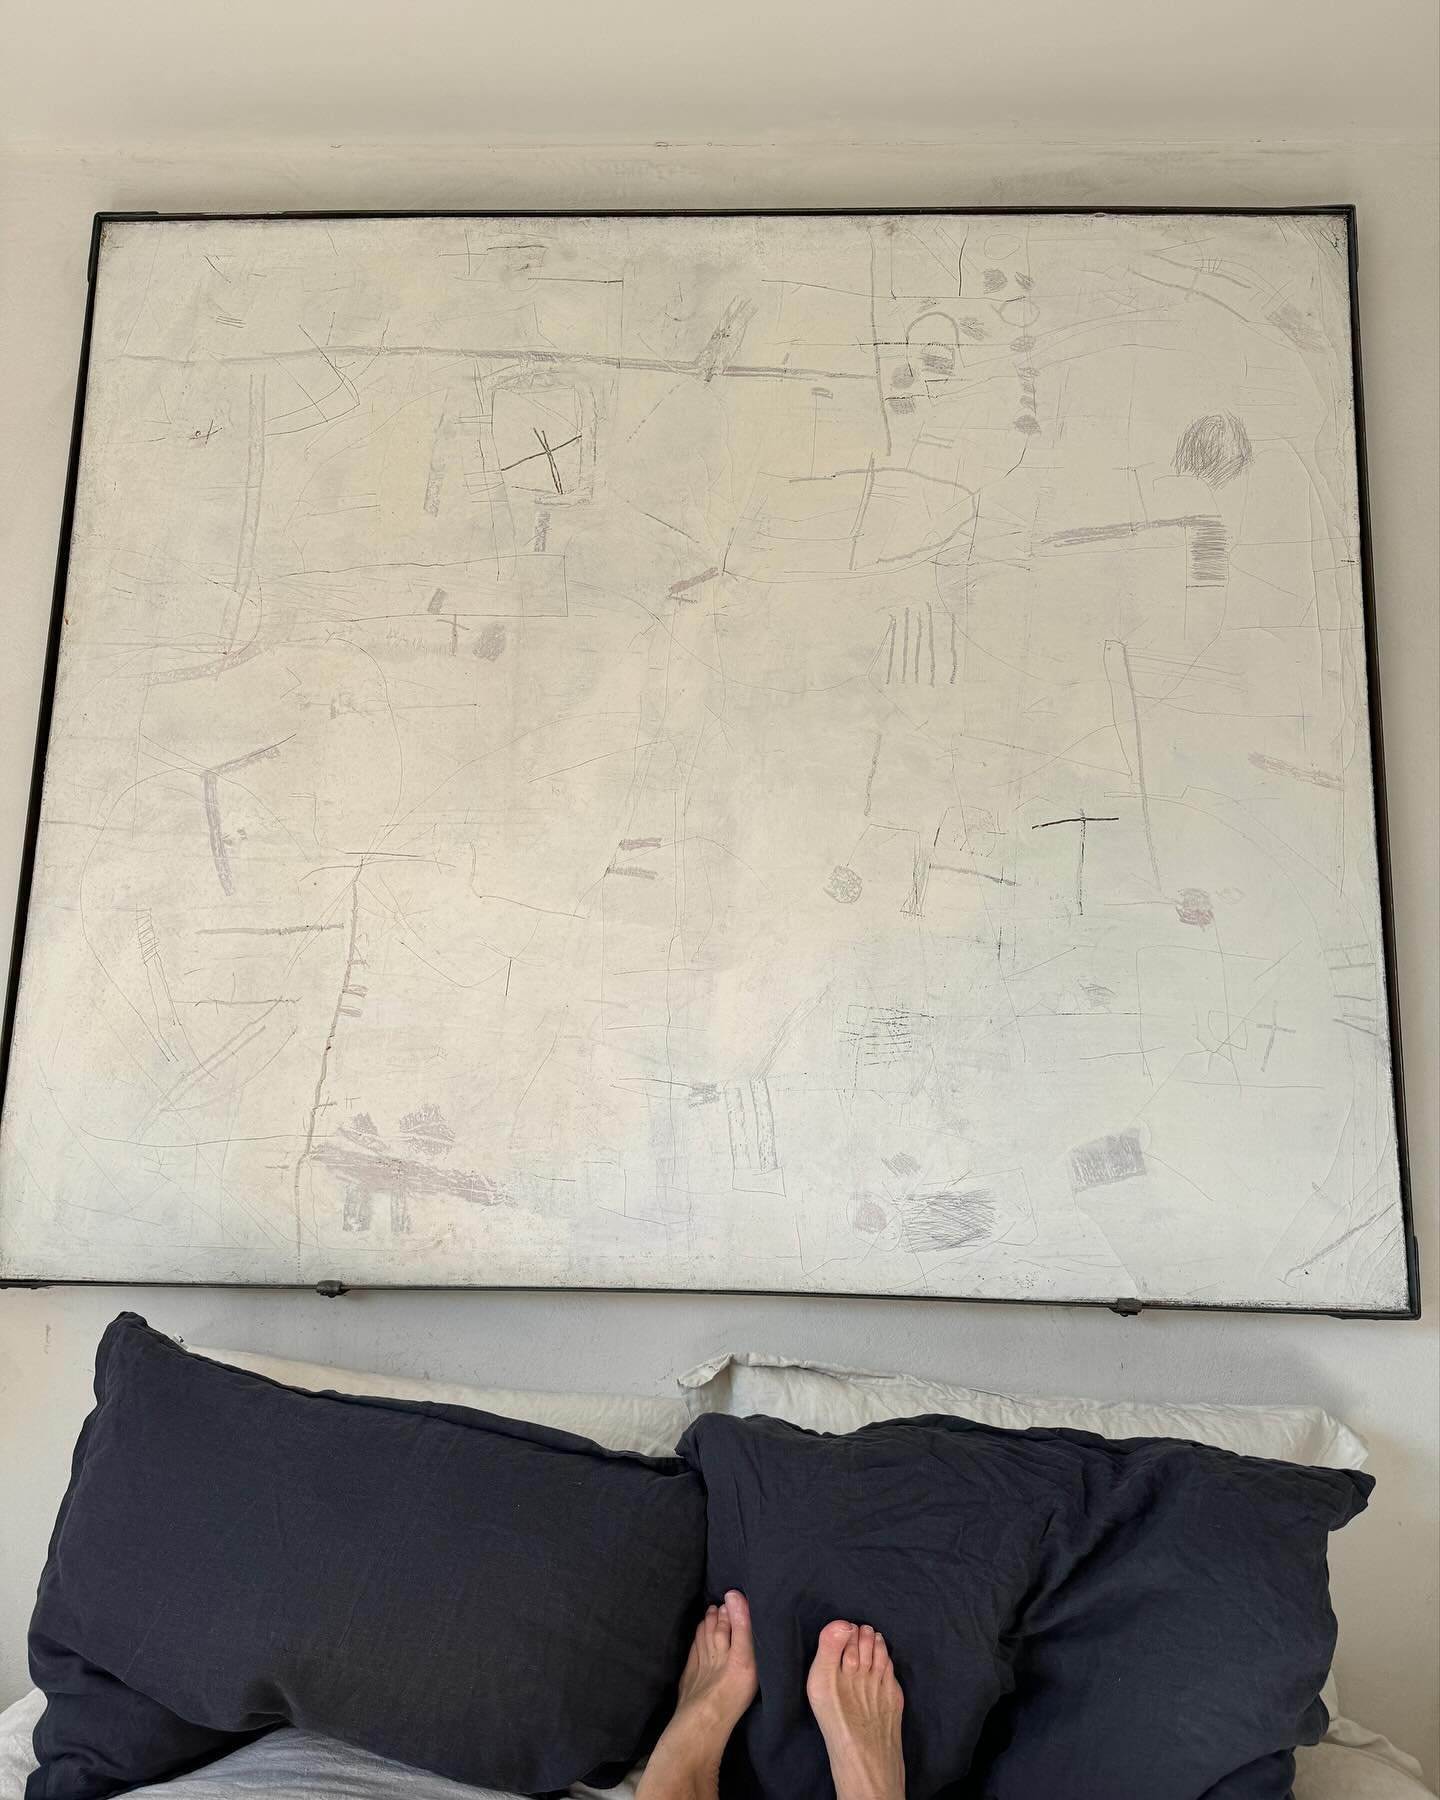 Lying in the sun upside on my bed before dining @chapters_hayonwye I am loving all the mark making in this large Roger Cecil canvas which hangs above my bed &hellip; I so do wish I had known him &hellip;
.
.
#rogercecil #welshartist #mycuratedbedroom